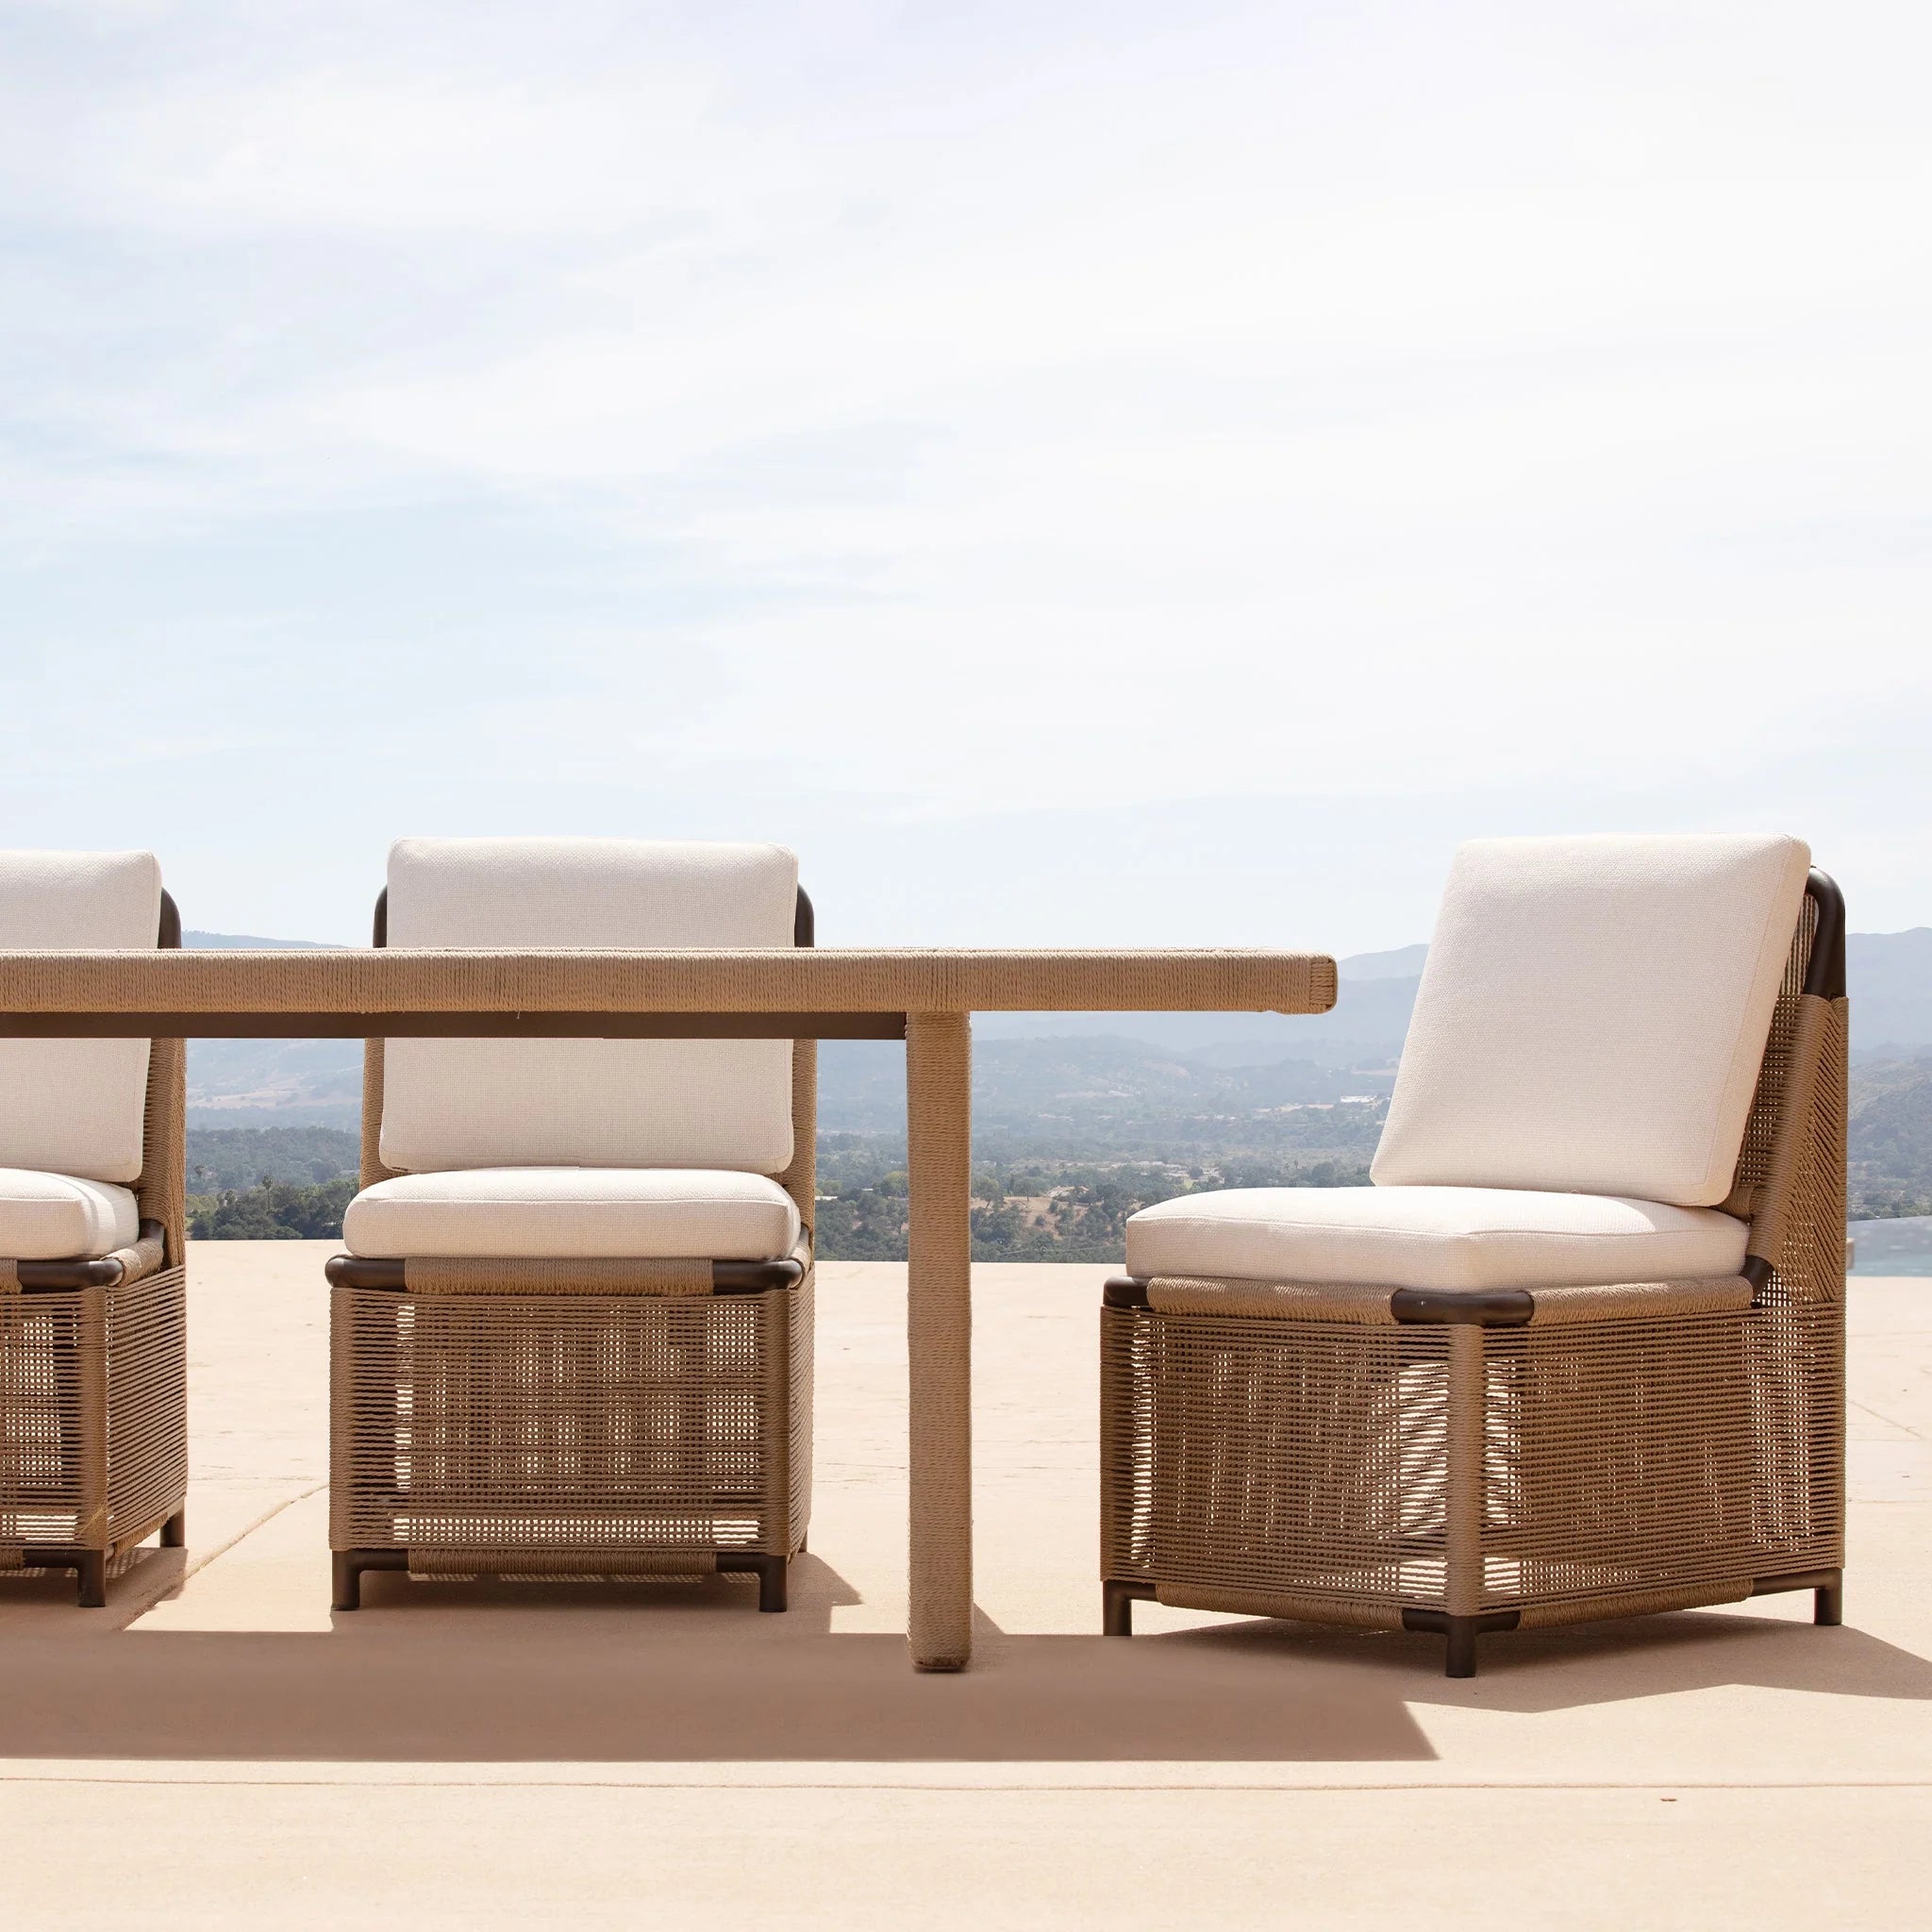 Boxhill's Formentera Armless Outdoor Dining Chair Lifestyle Image